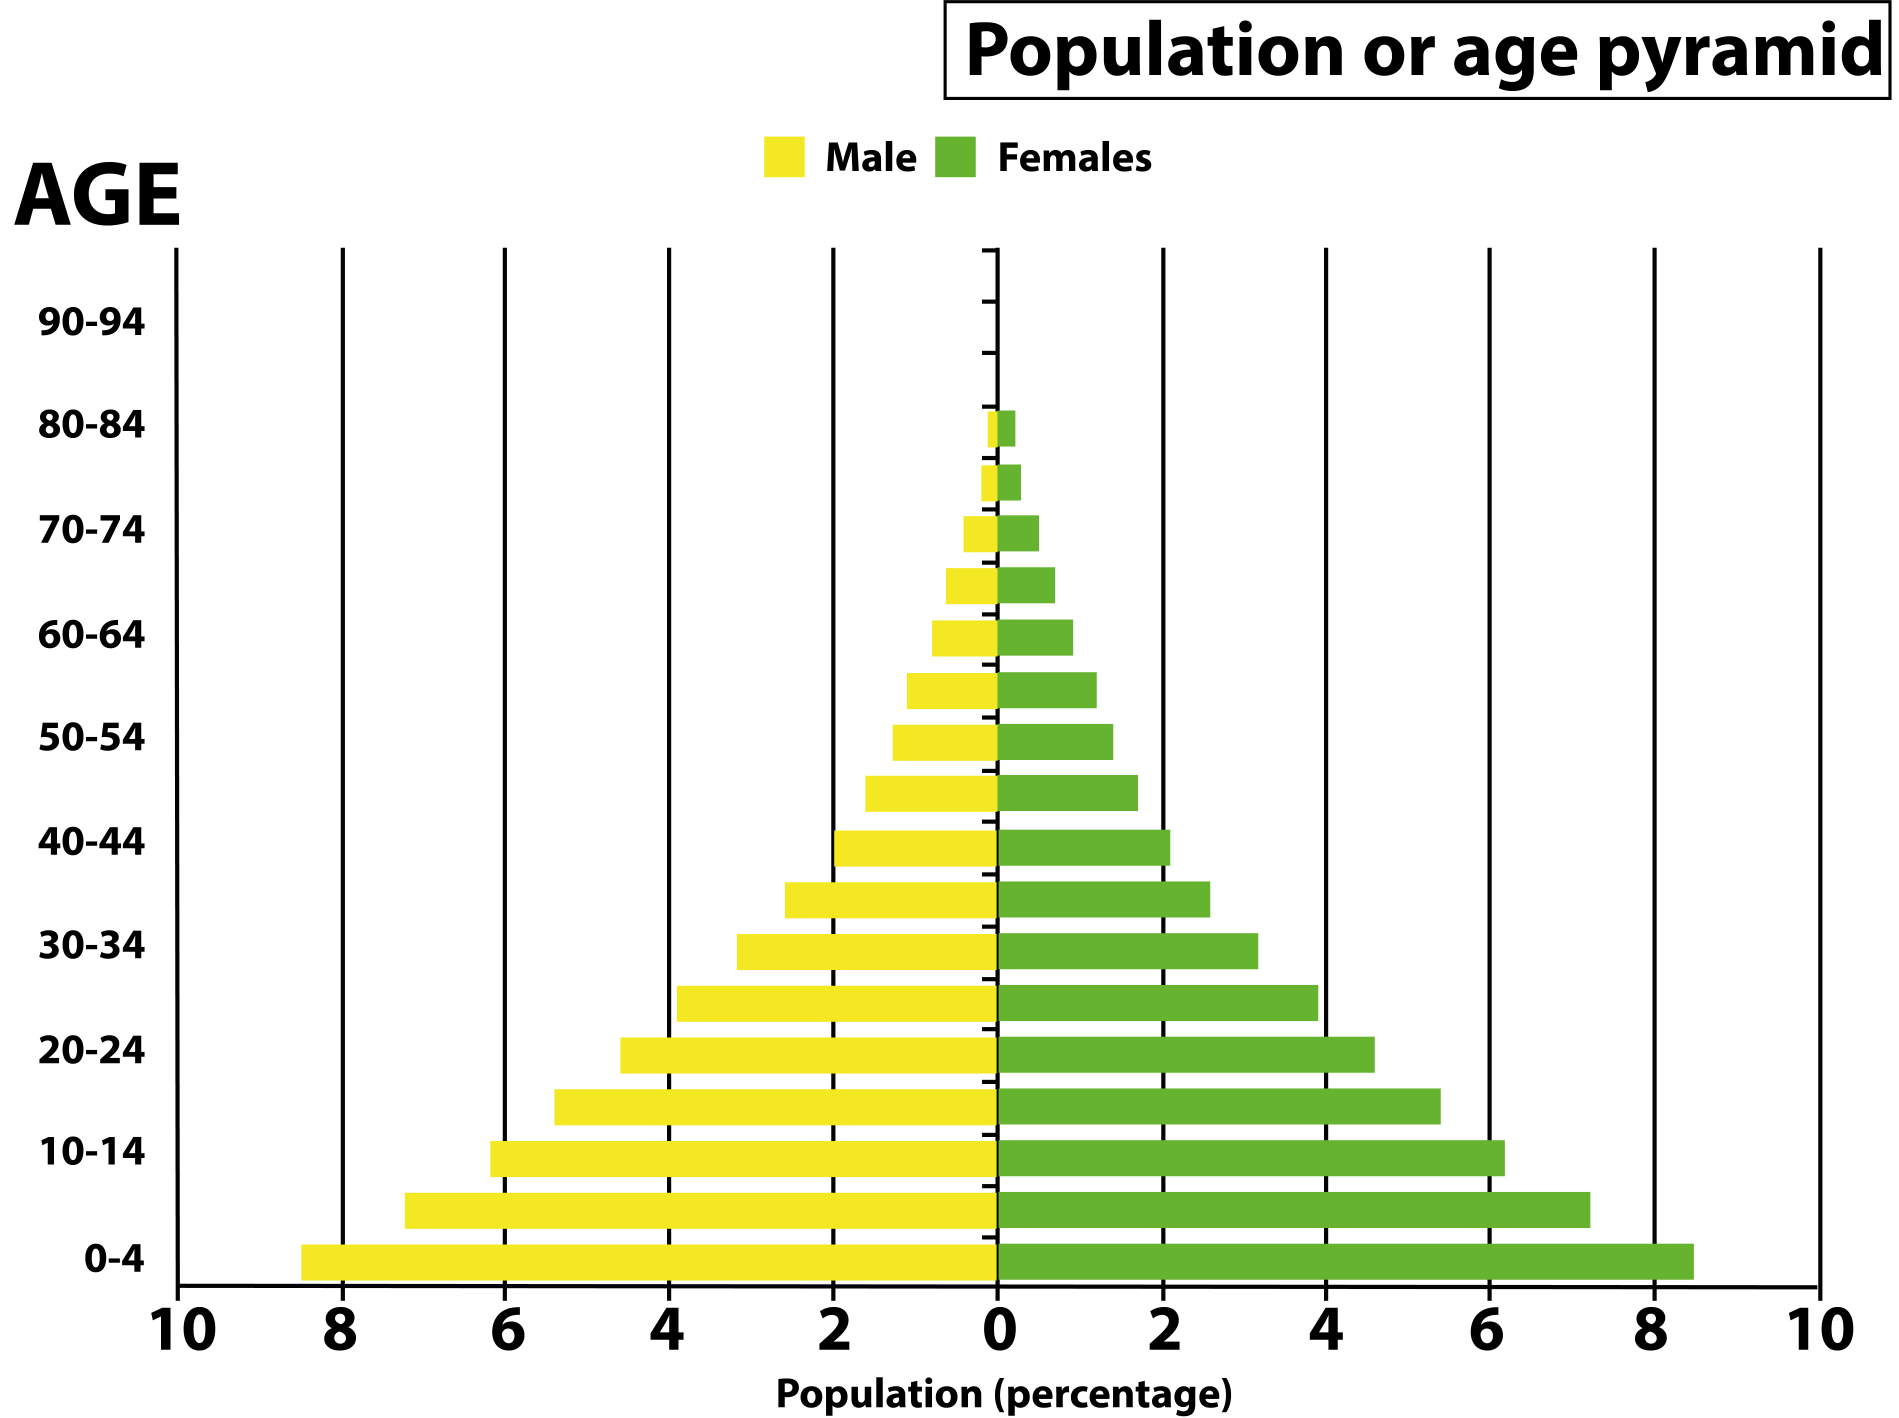 Different Types Of Population Pyramids